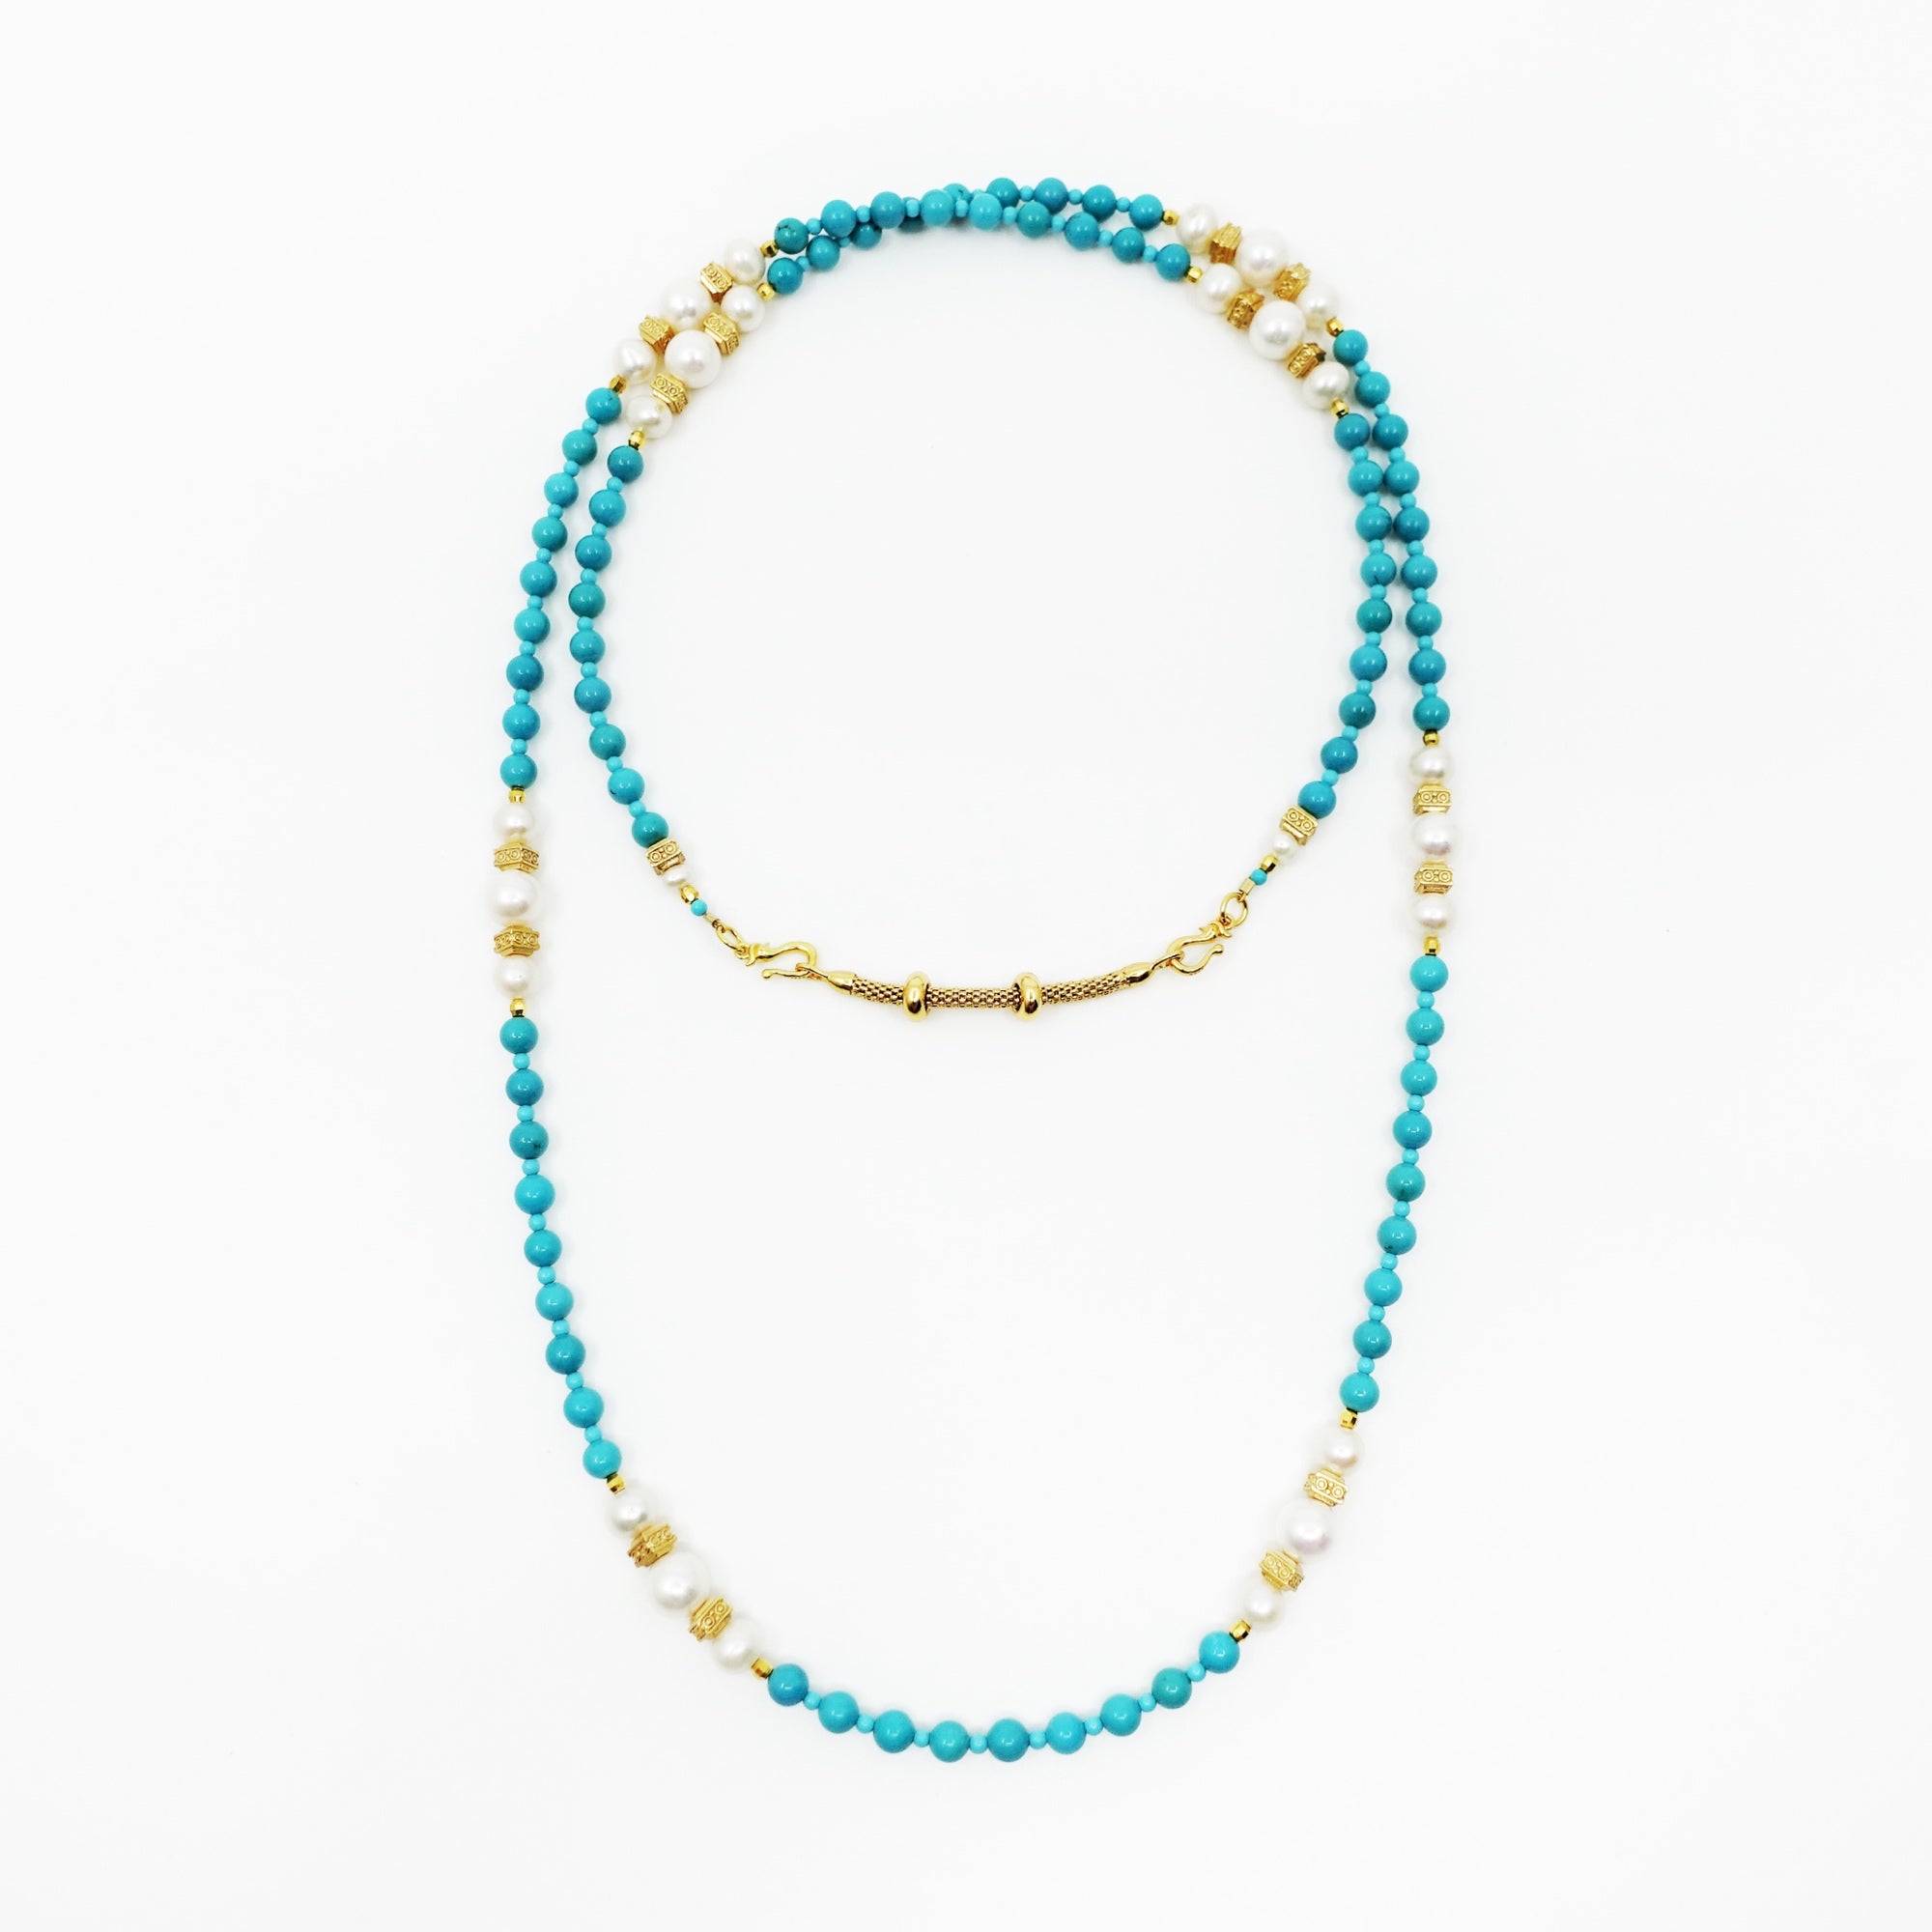 Turquoise & Gold Beaded Necklace – Dandelion Jewelry